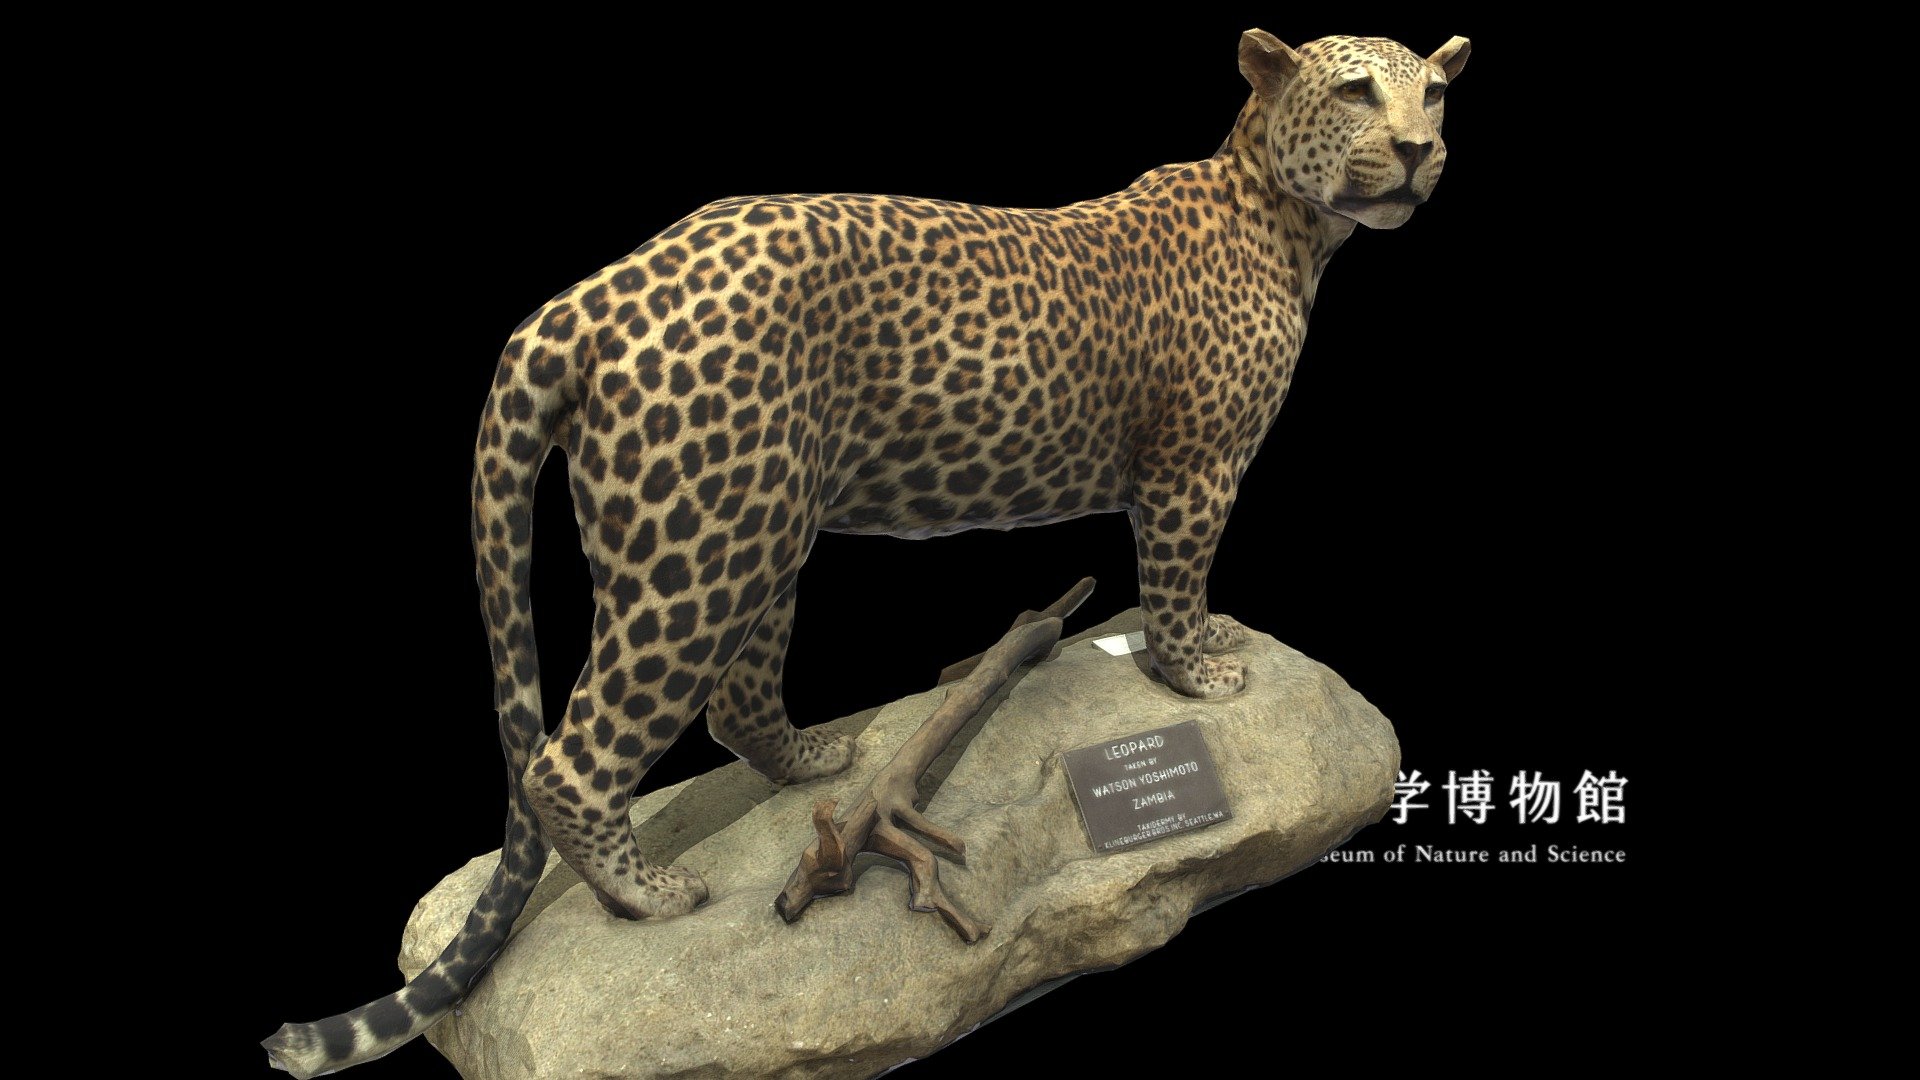 ■ About specimen



Scientific name : Panthera pardus

Japanese vernacular name : ヒョウ

English vernacular name : Leopard

Specimen type : Taxidermy specimen

Collection date : 1981-07

Collection place : Luangwa Valley, Kafue, Bangweulu, ZAMBIA

See also : record page on the &ldquo;Yoshimoto 3D